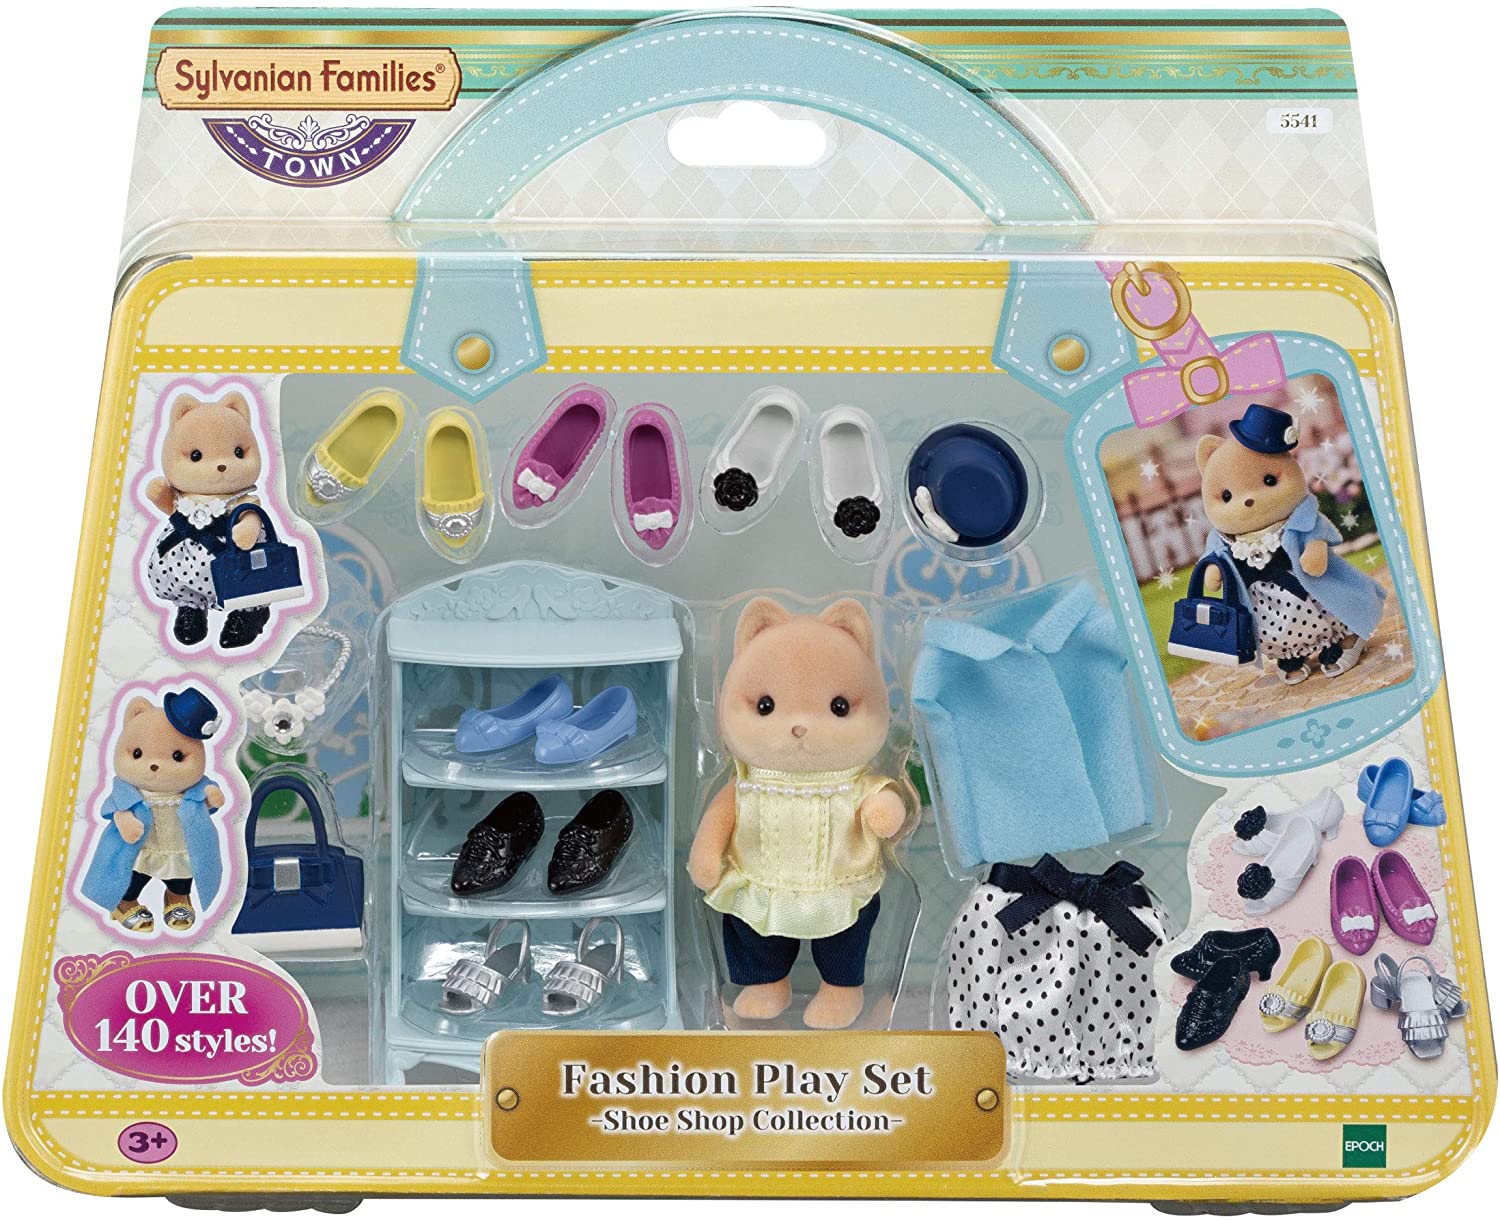 New Calico Critters Sylvanian Families toy sets 2021: Shoe Shop, Spooky  Surprise House, Midnight Cat family, Panda family and more!